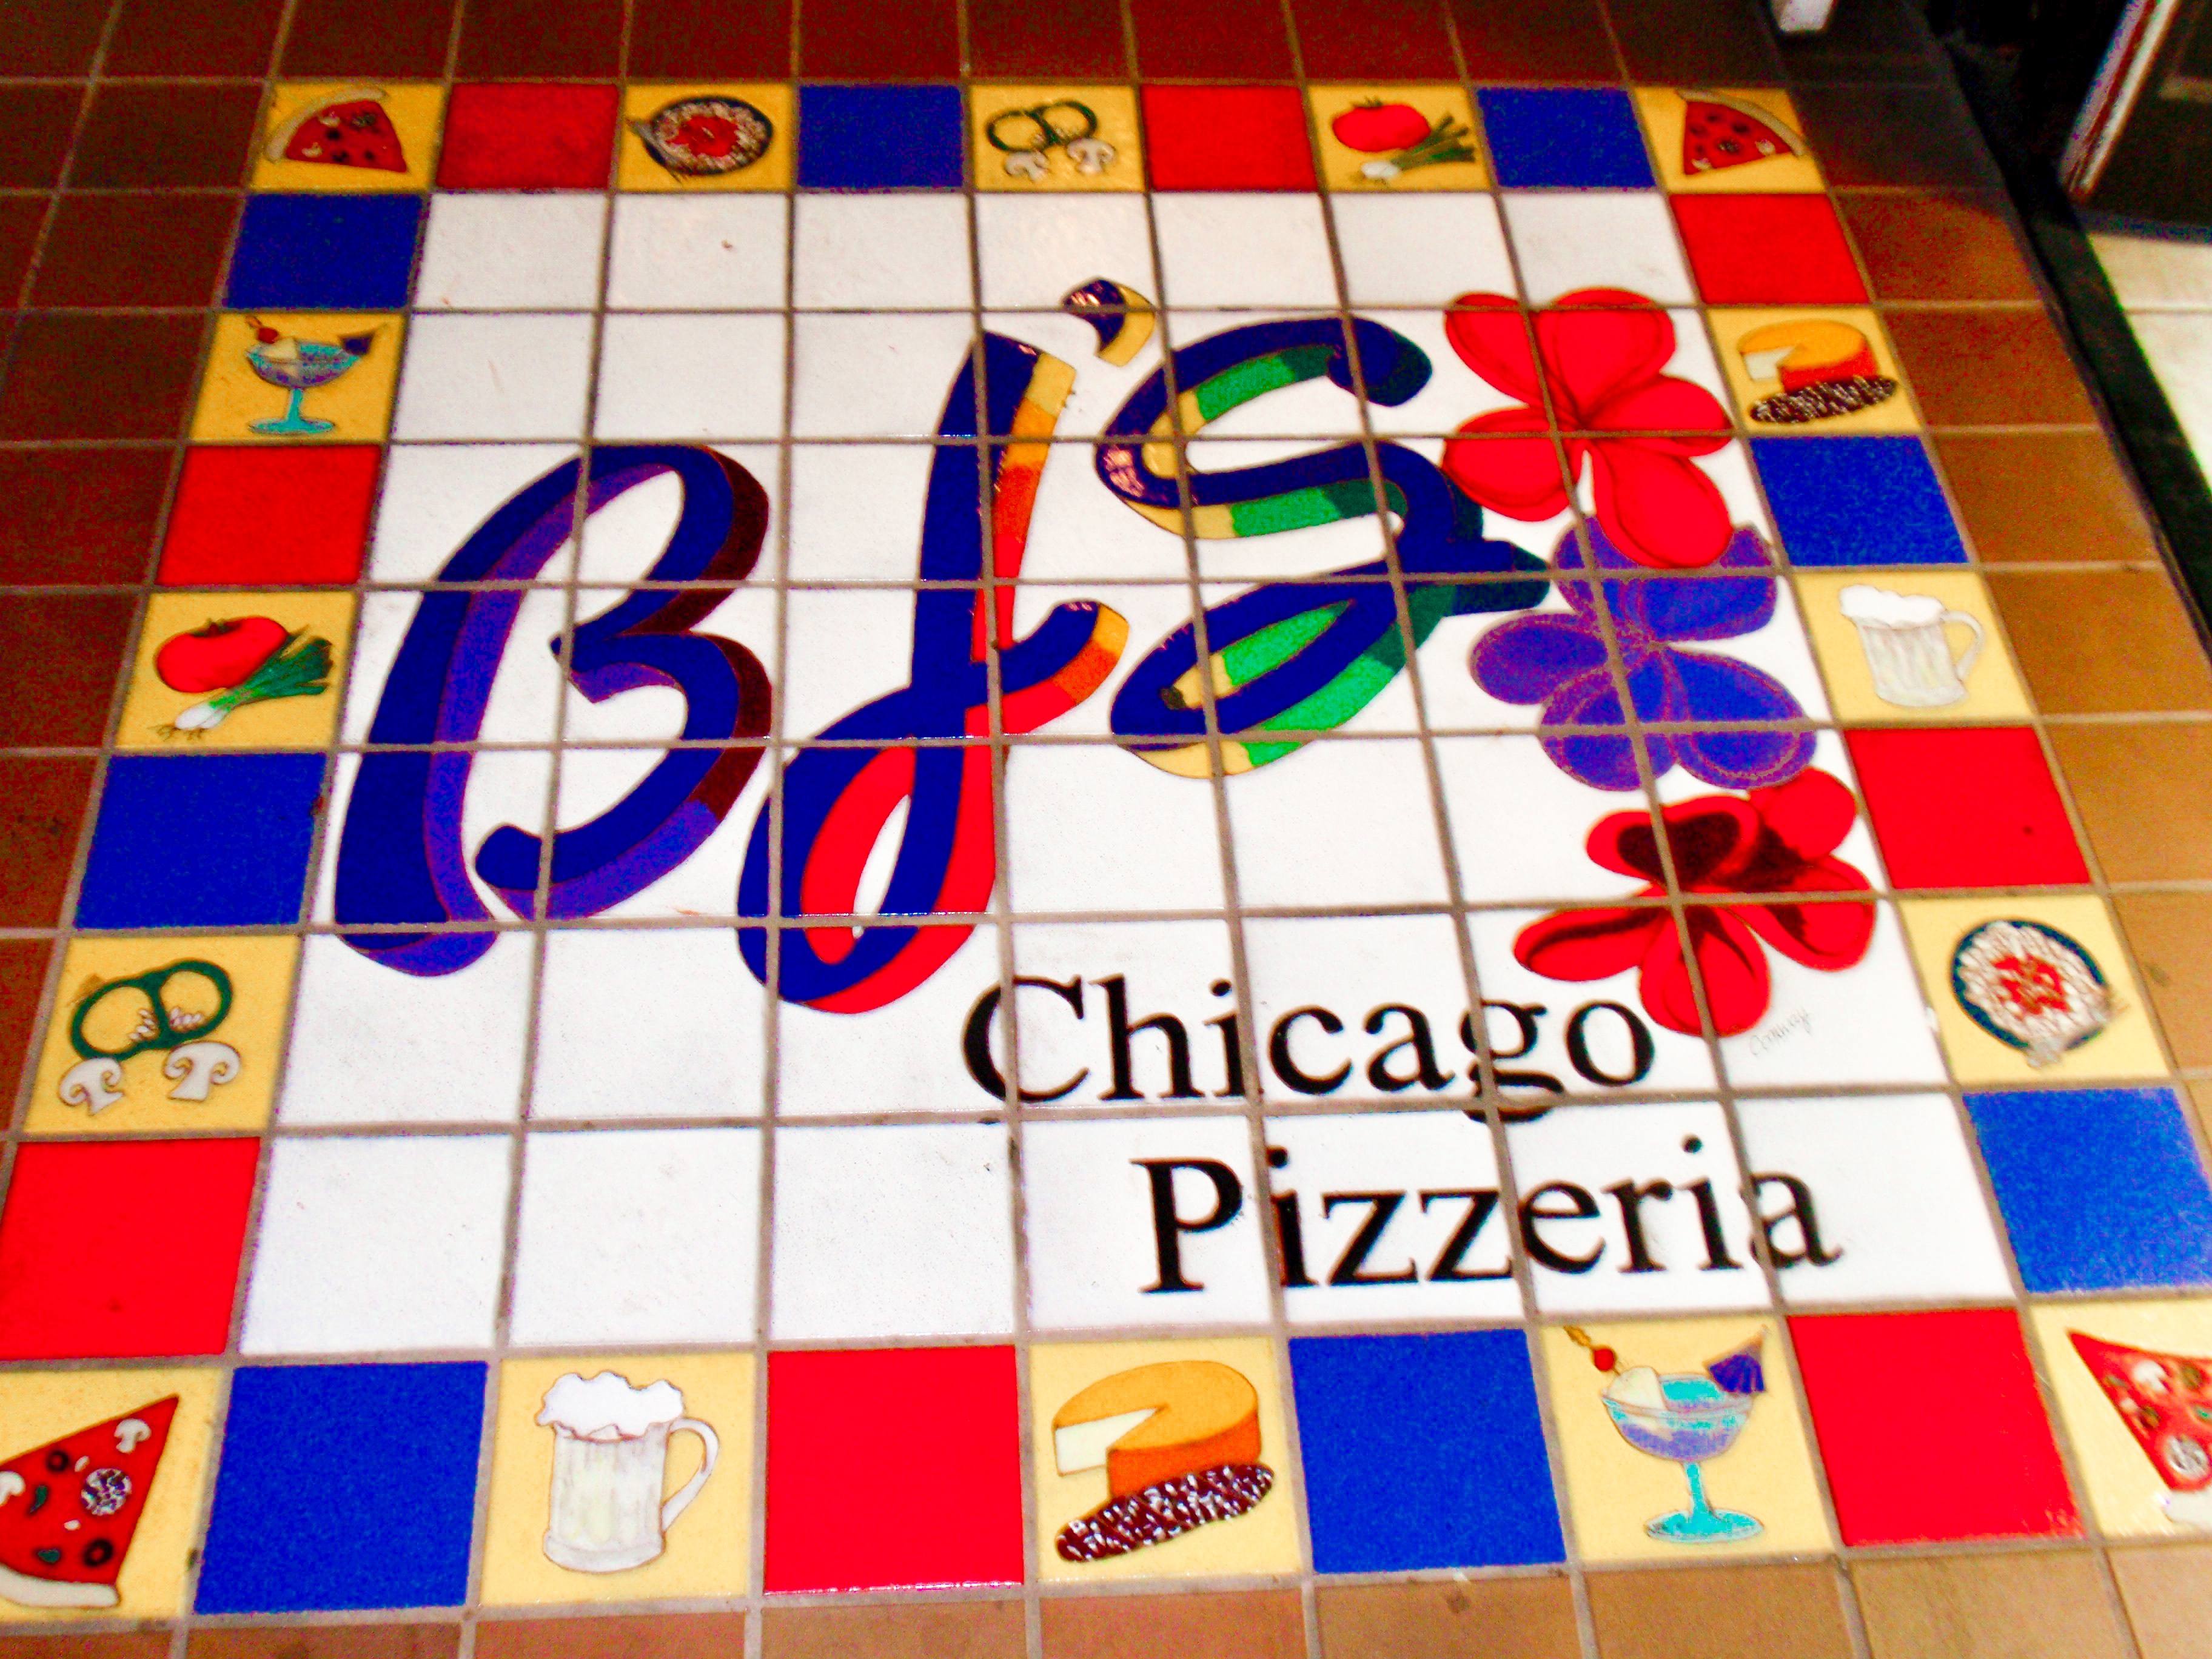 The tile mosaic from BJ's Chicago Pizzeria 